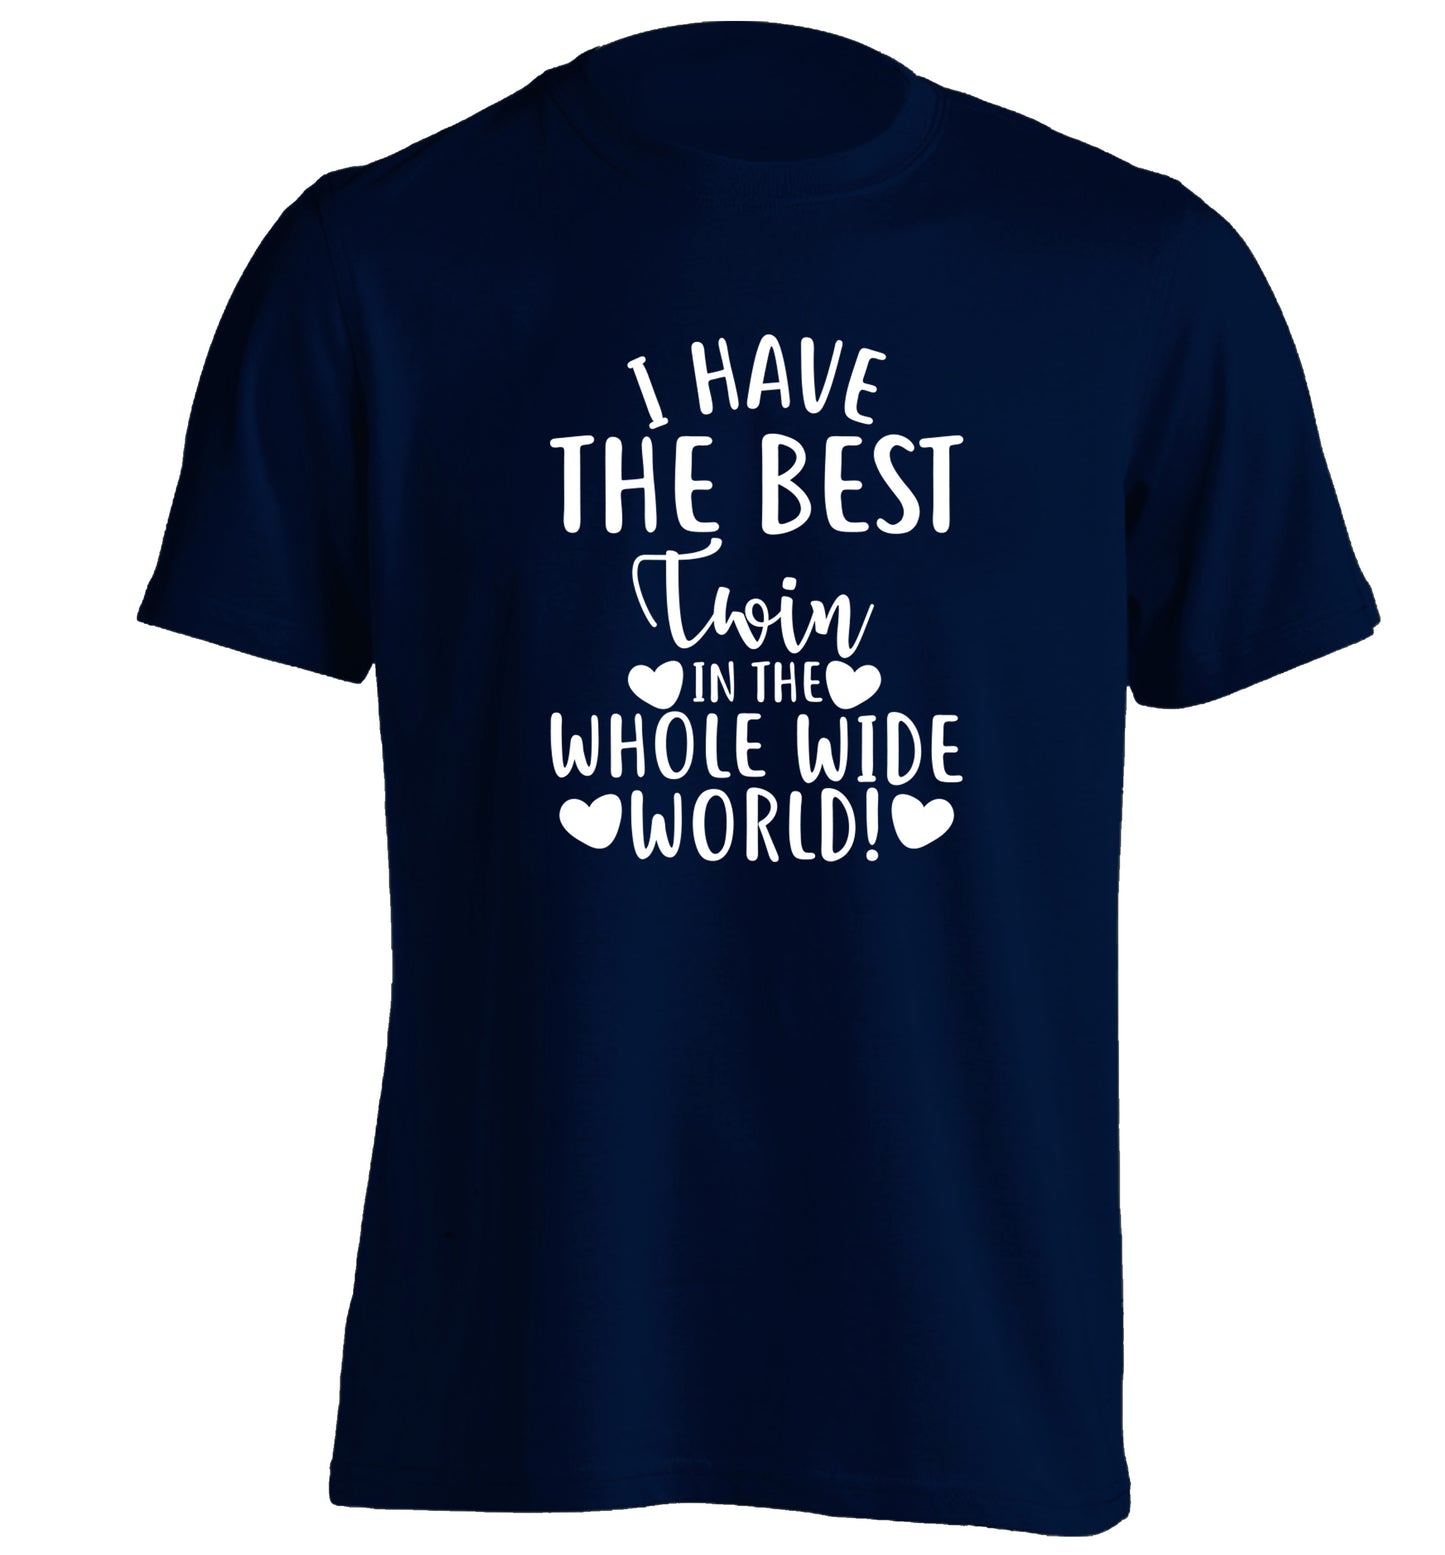 I have the best twin in the whole wide world! adults unisex navy Tshirt 2XL